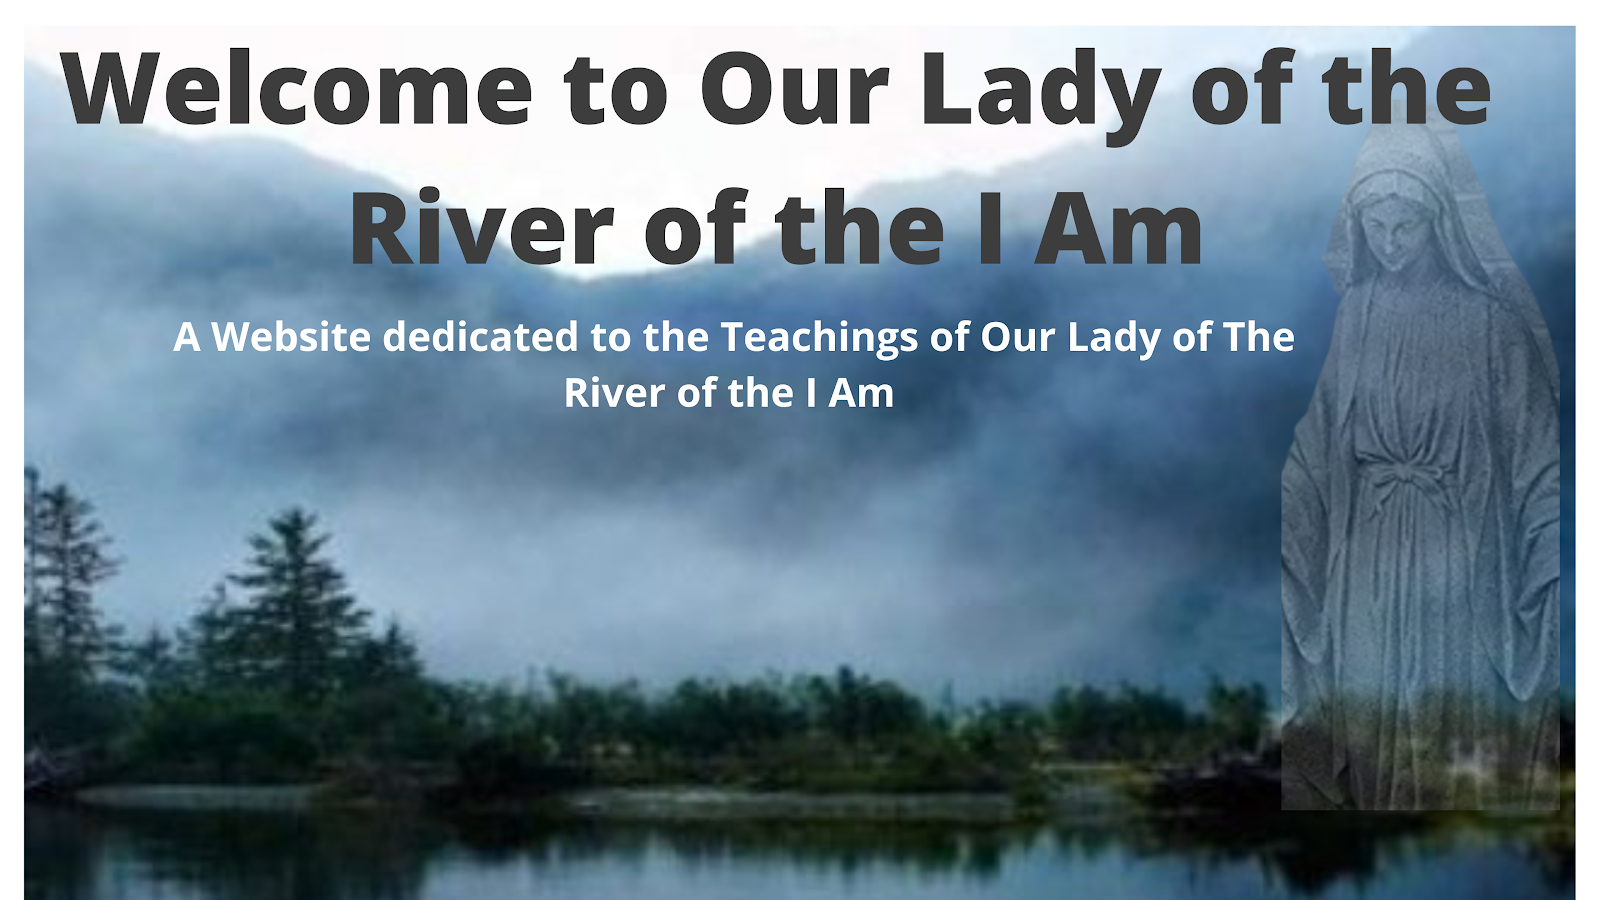 Welcome to Our Lady of the River of the I Am